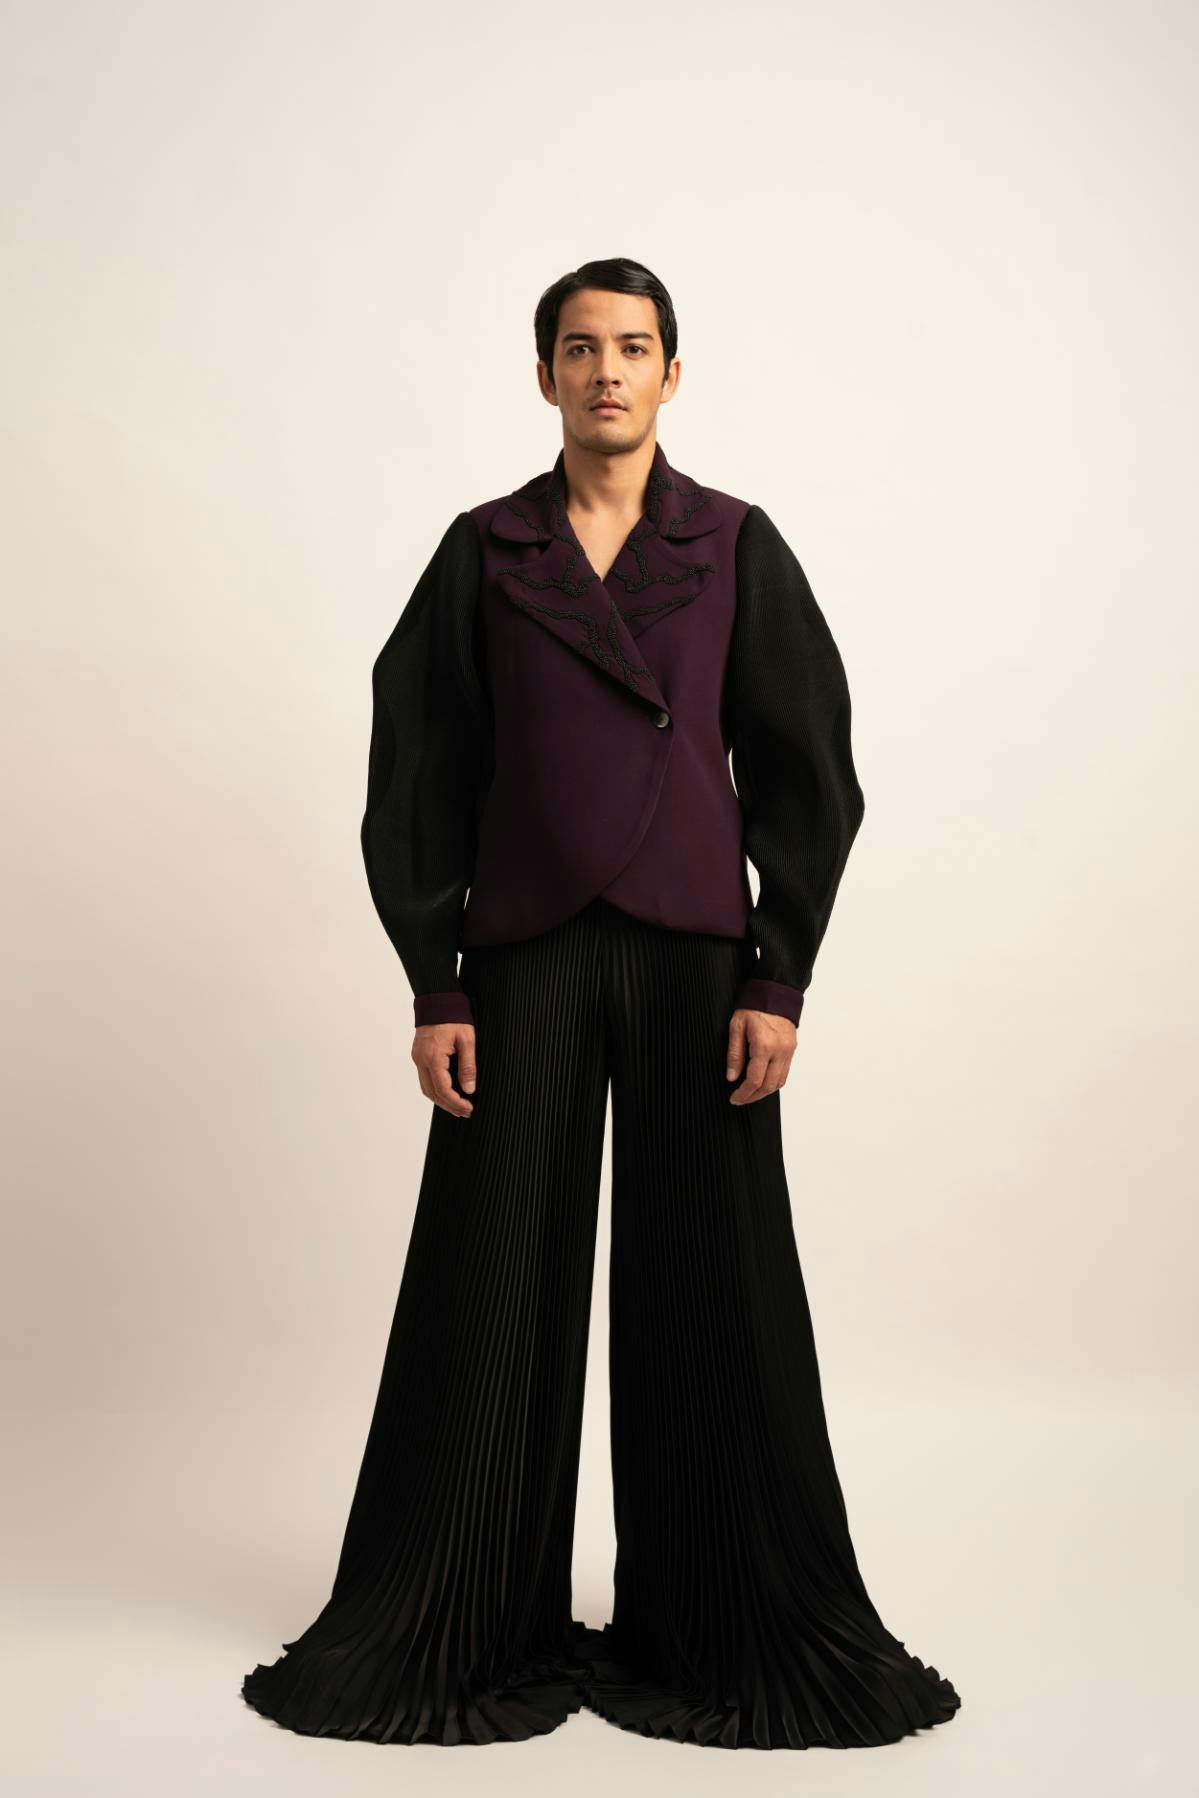 The Flux Fusion Blazer Set, a product by Siddhant Agrawal Label